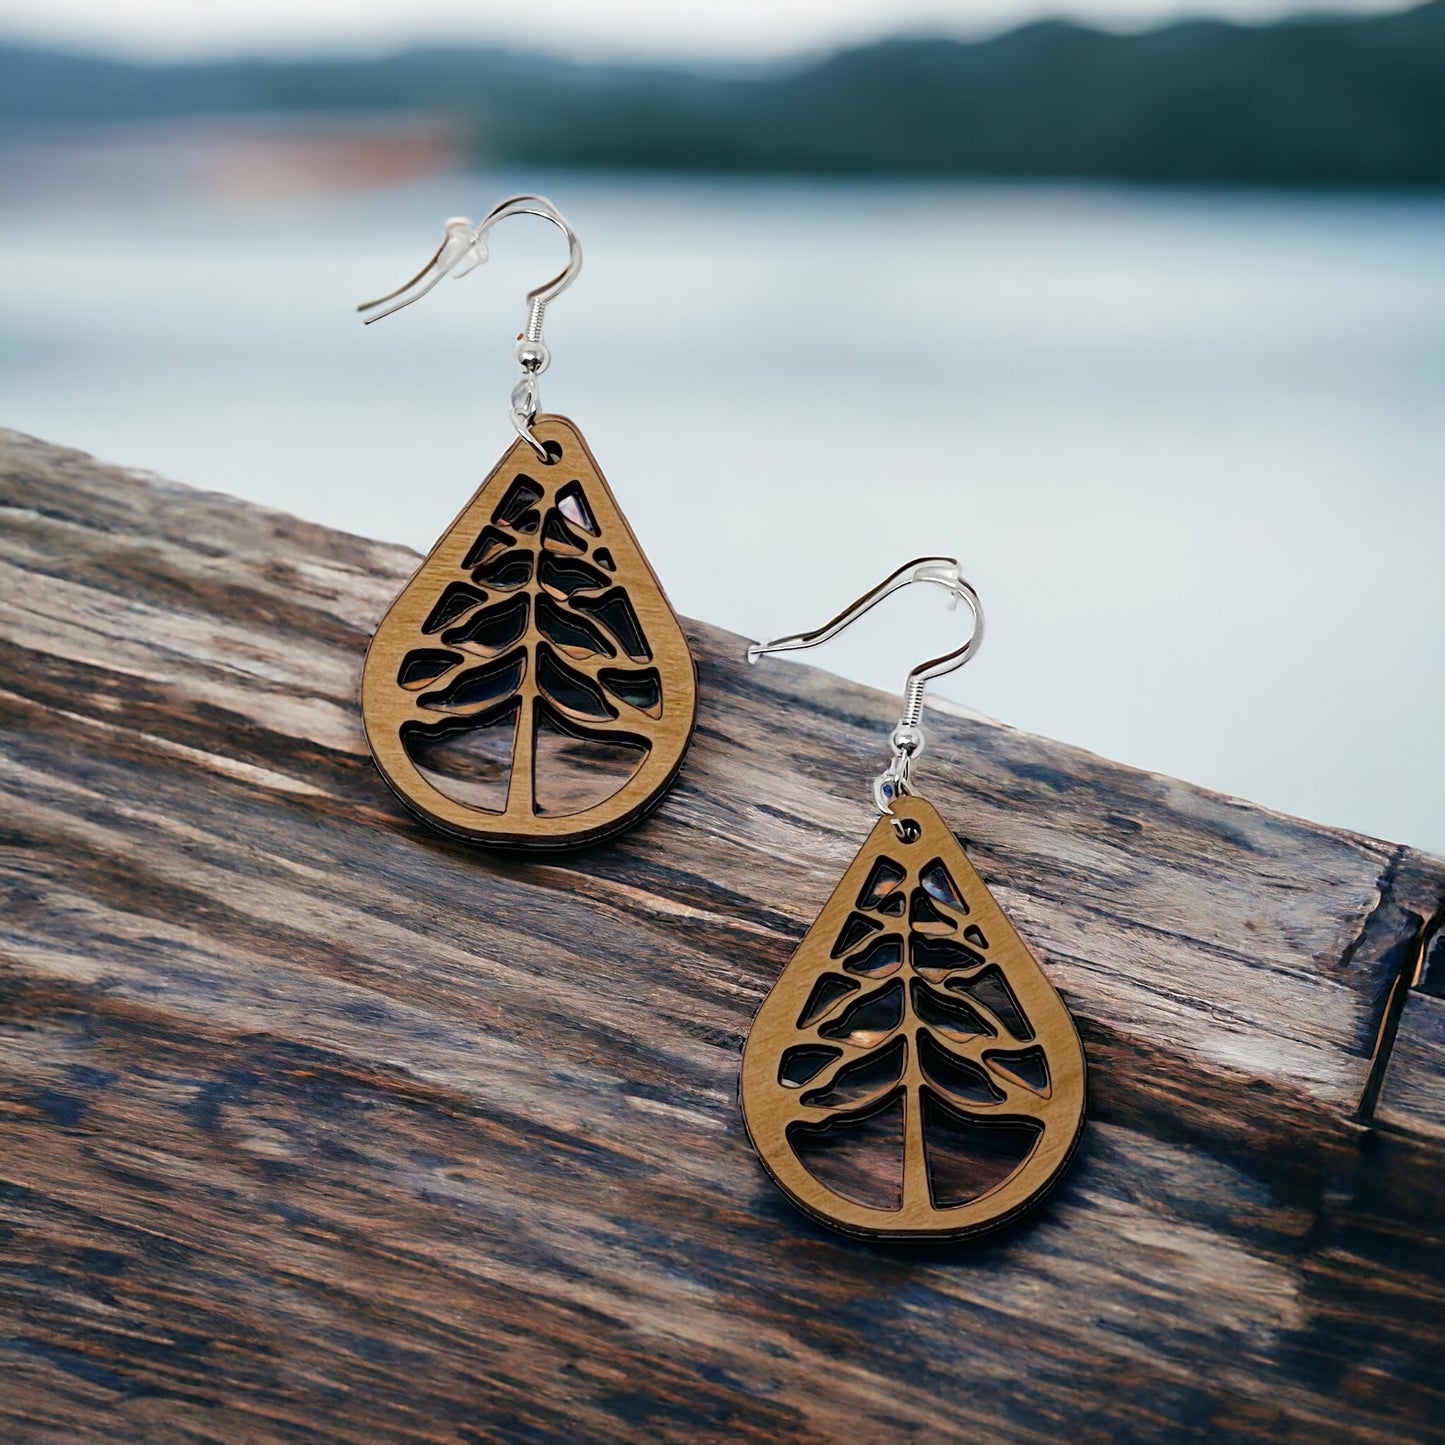 Teardrop Tree Earrings - Rustic Wood Dangle Earrings with a Whimsical Boho Touch, Cute Winter Holiday Accessories | Nature-Inspired Jewelry